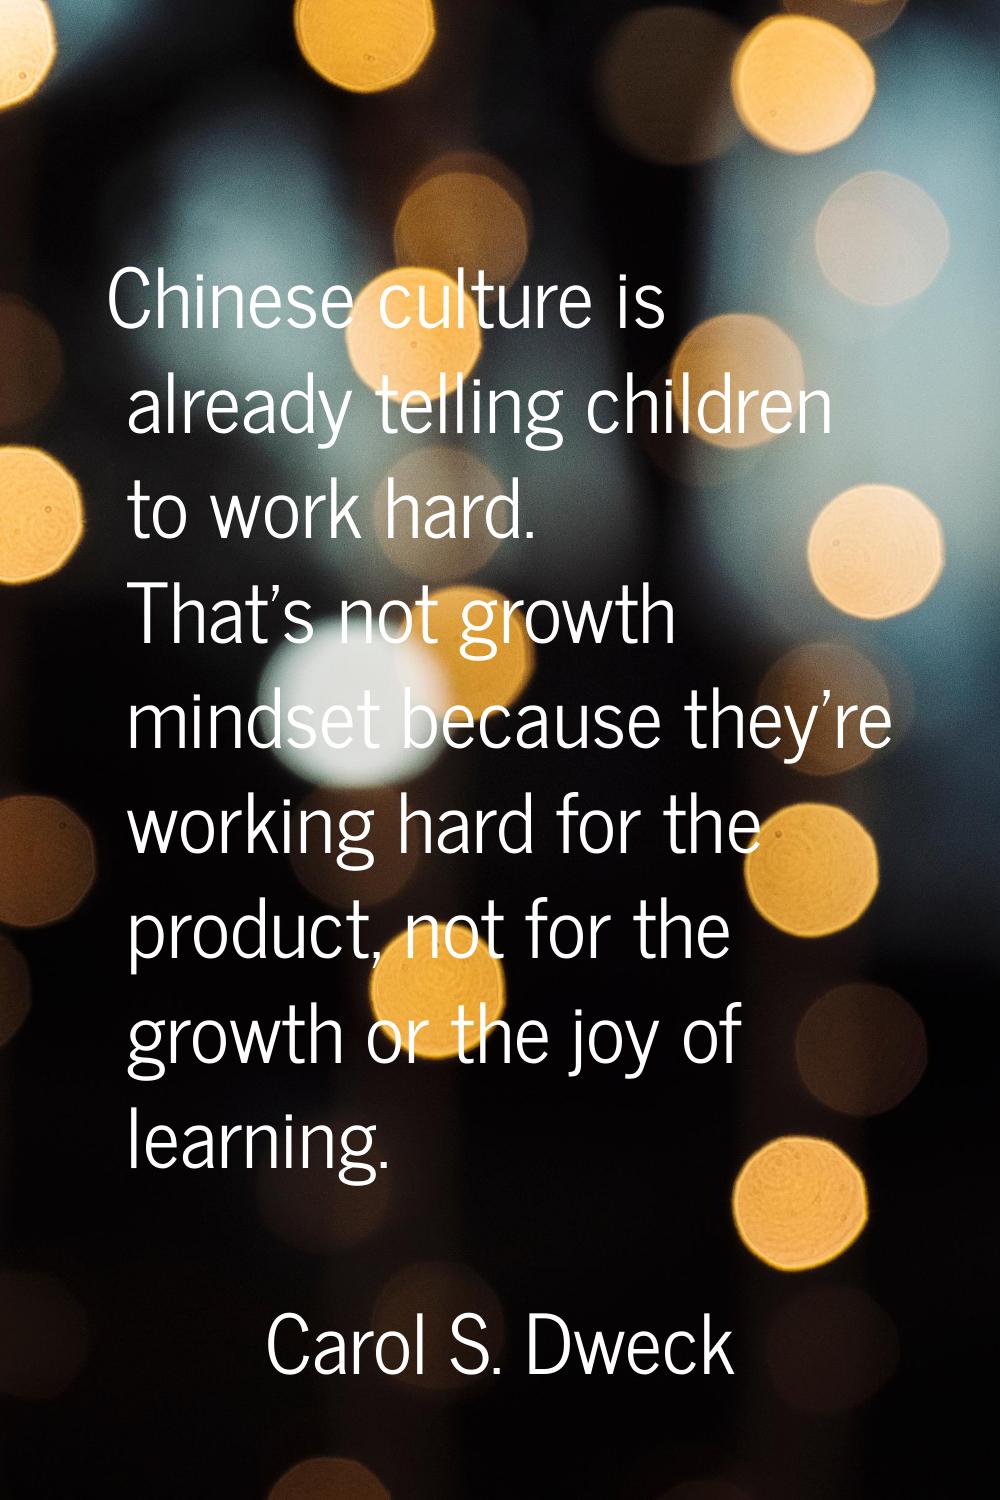 Chinese culture is already telling children to work hard. That's not growth mindset because they're